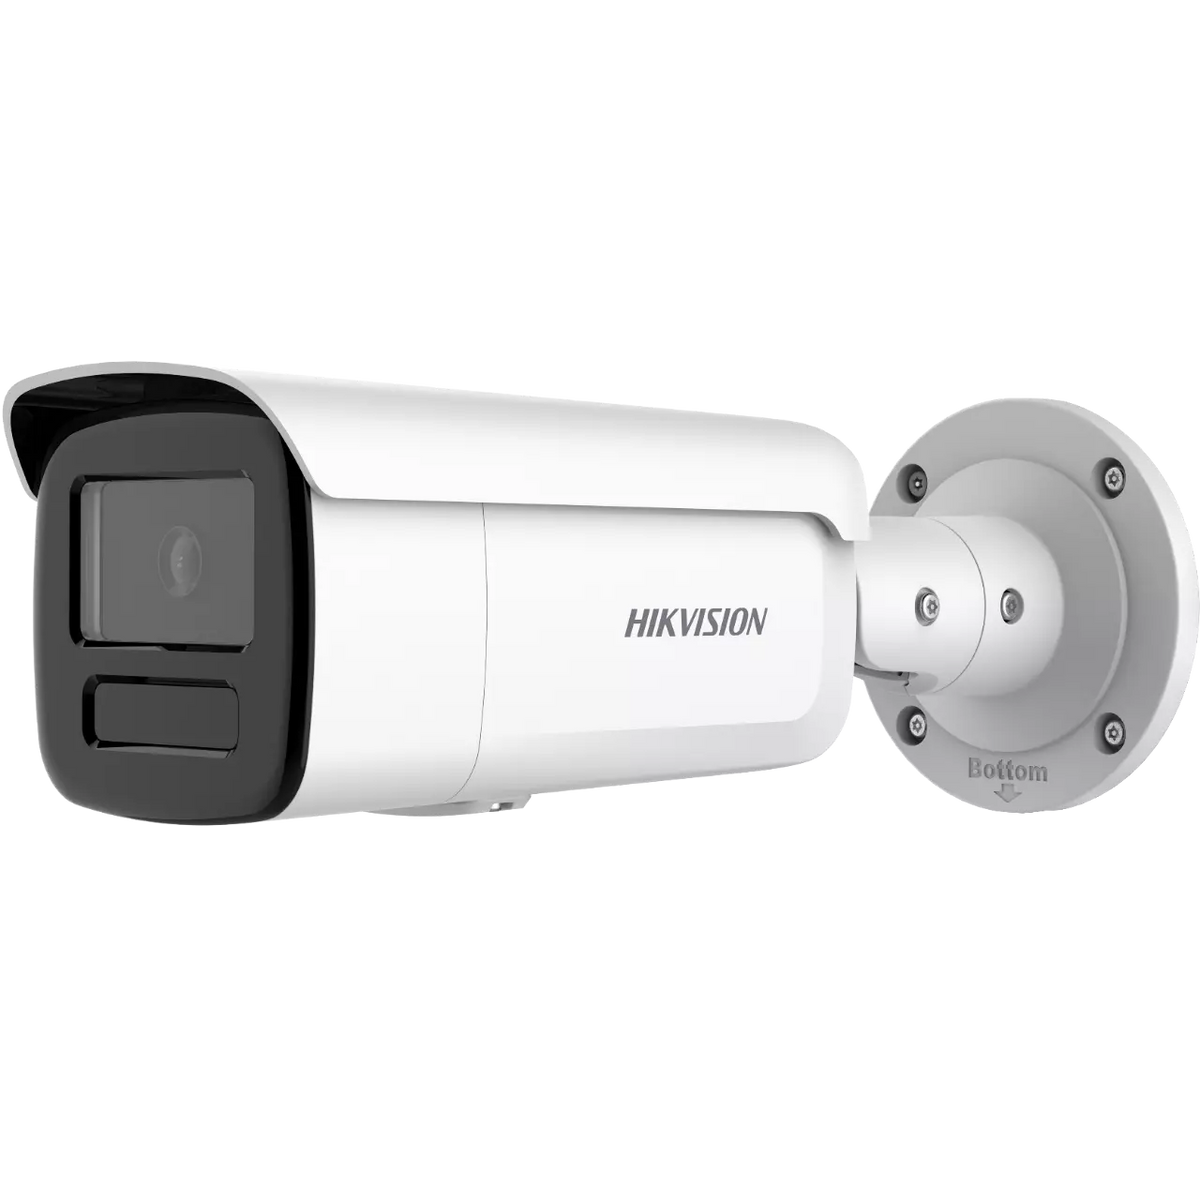 HIKVISION DS-2CD2T46G2-4IY